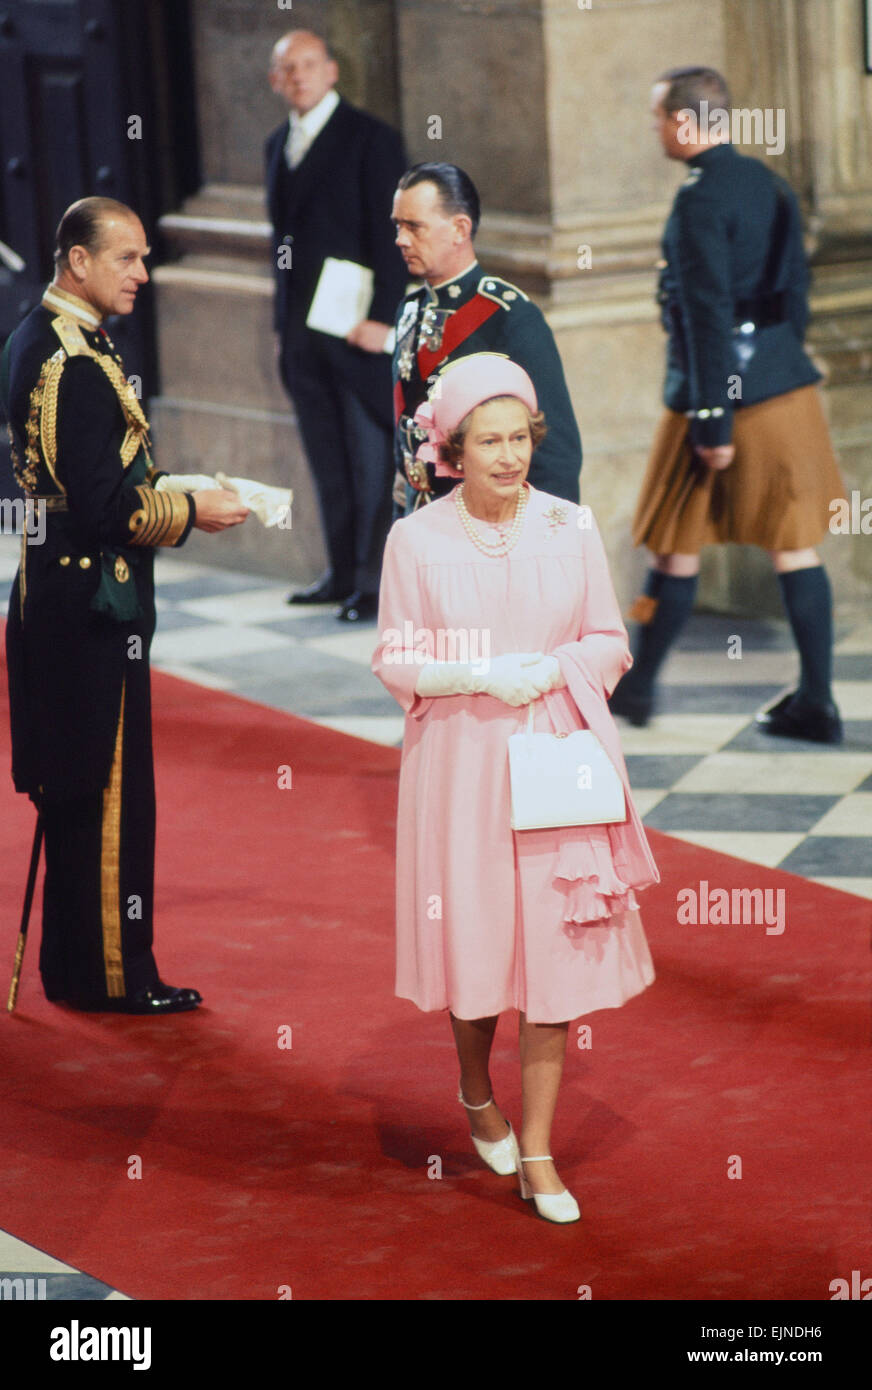 Queen Elizabeth II & Prince Philip arrive at St Pauls Cathedral, for Thanksgiving service, to celebrate HRH Silver Jubilee, Tuesday 7th June 1977. Stock Photo